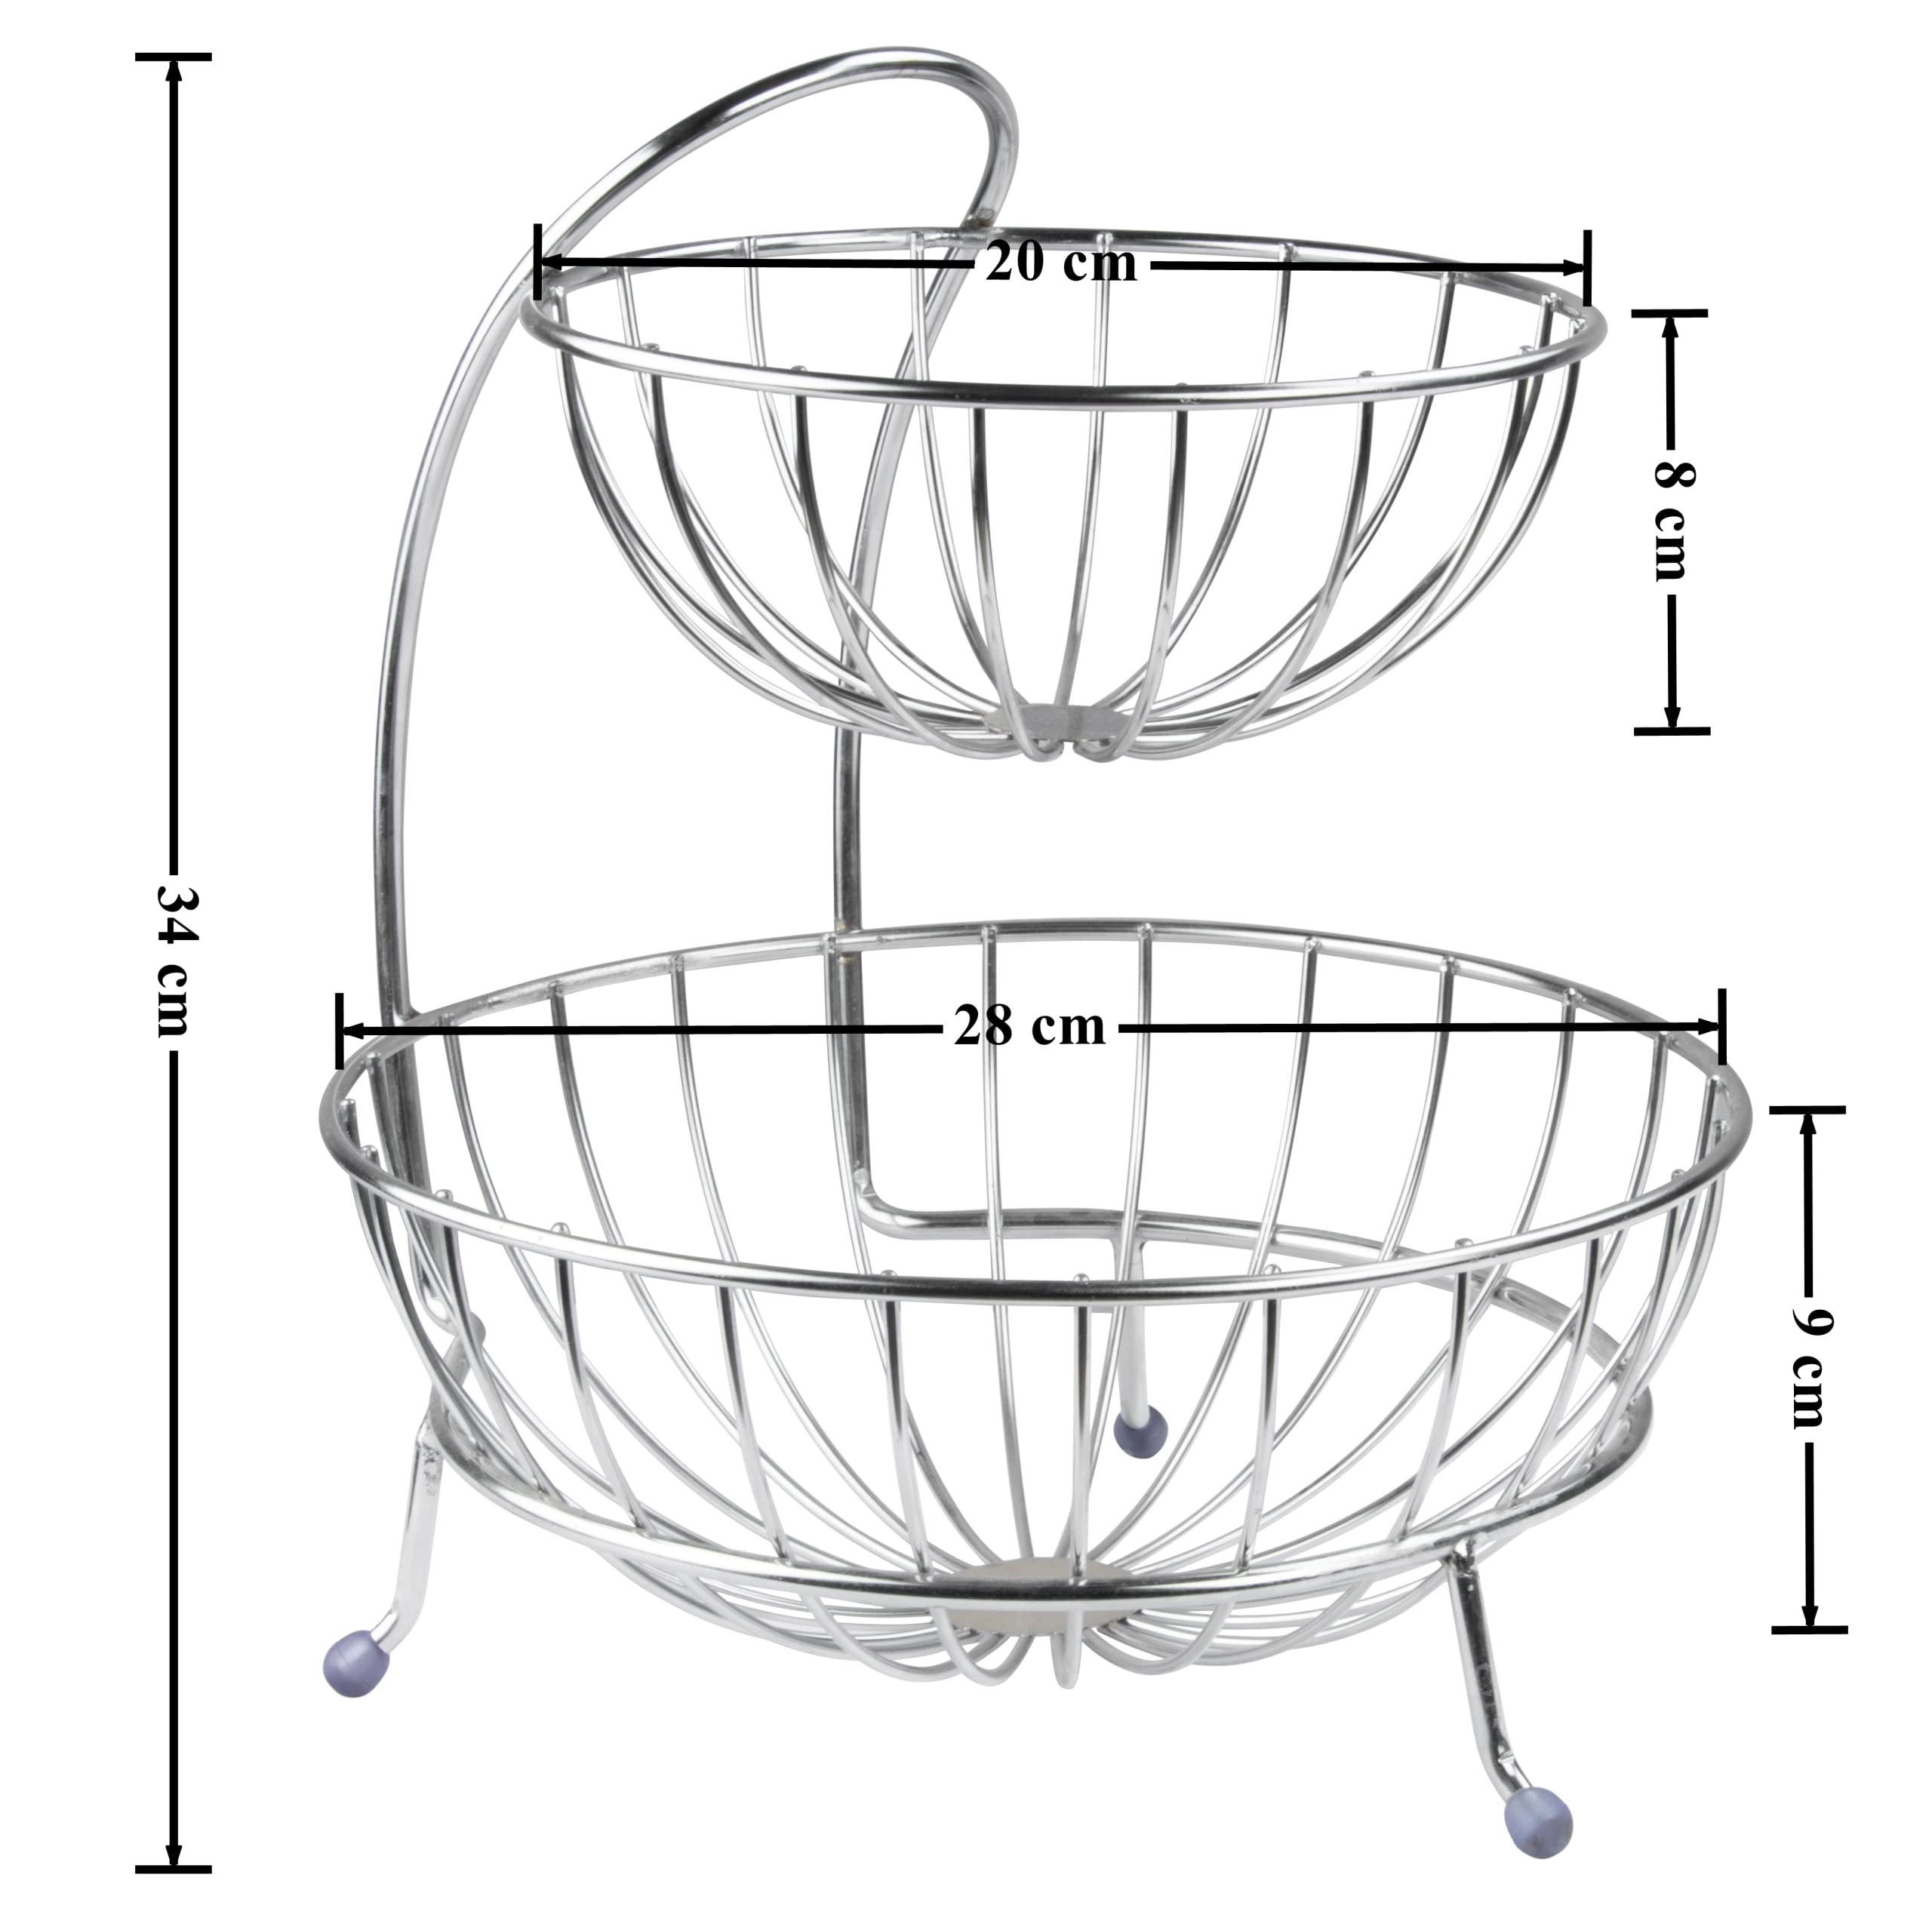 Plantex Stainless Steel 2-Tier Fruit & Vegetable Basket for Dining Table/Kitchen - Countertop (Chrome)